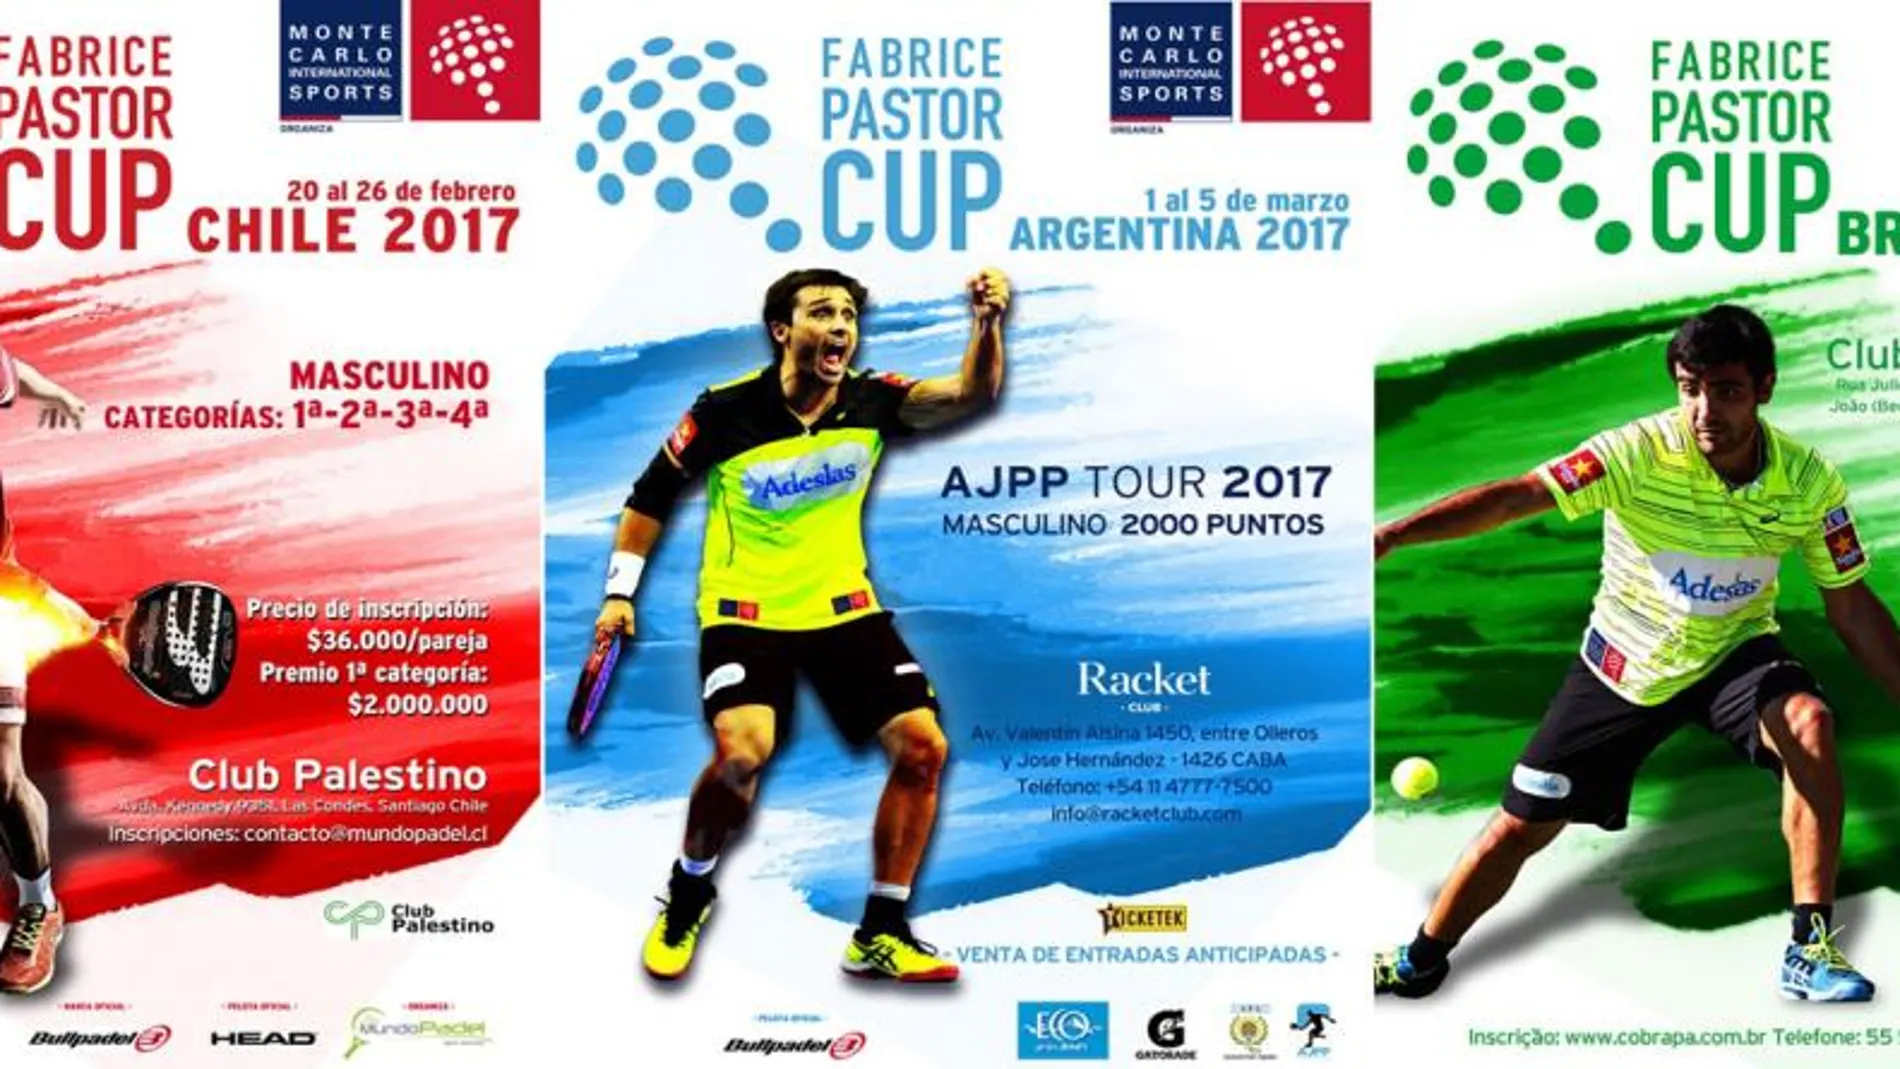 Fabrice Pastor Cup 2017